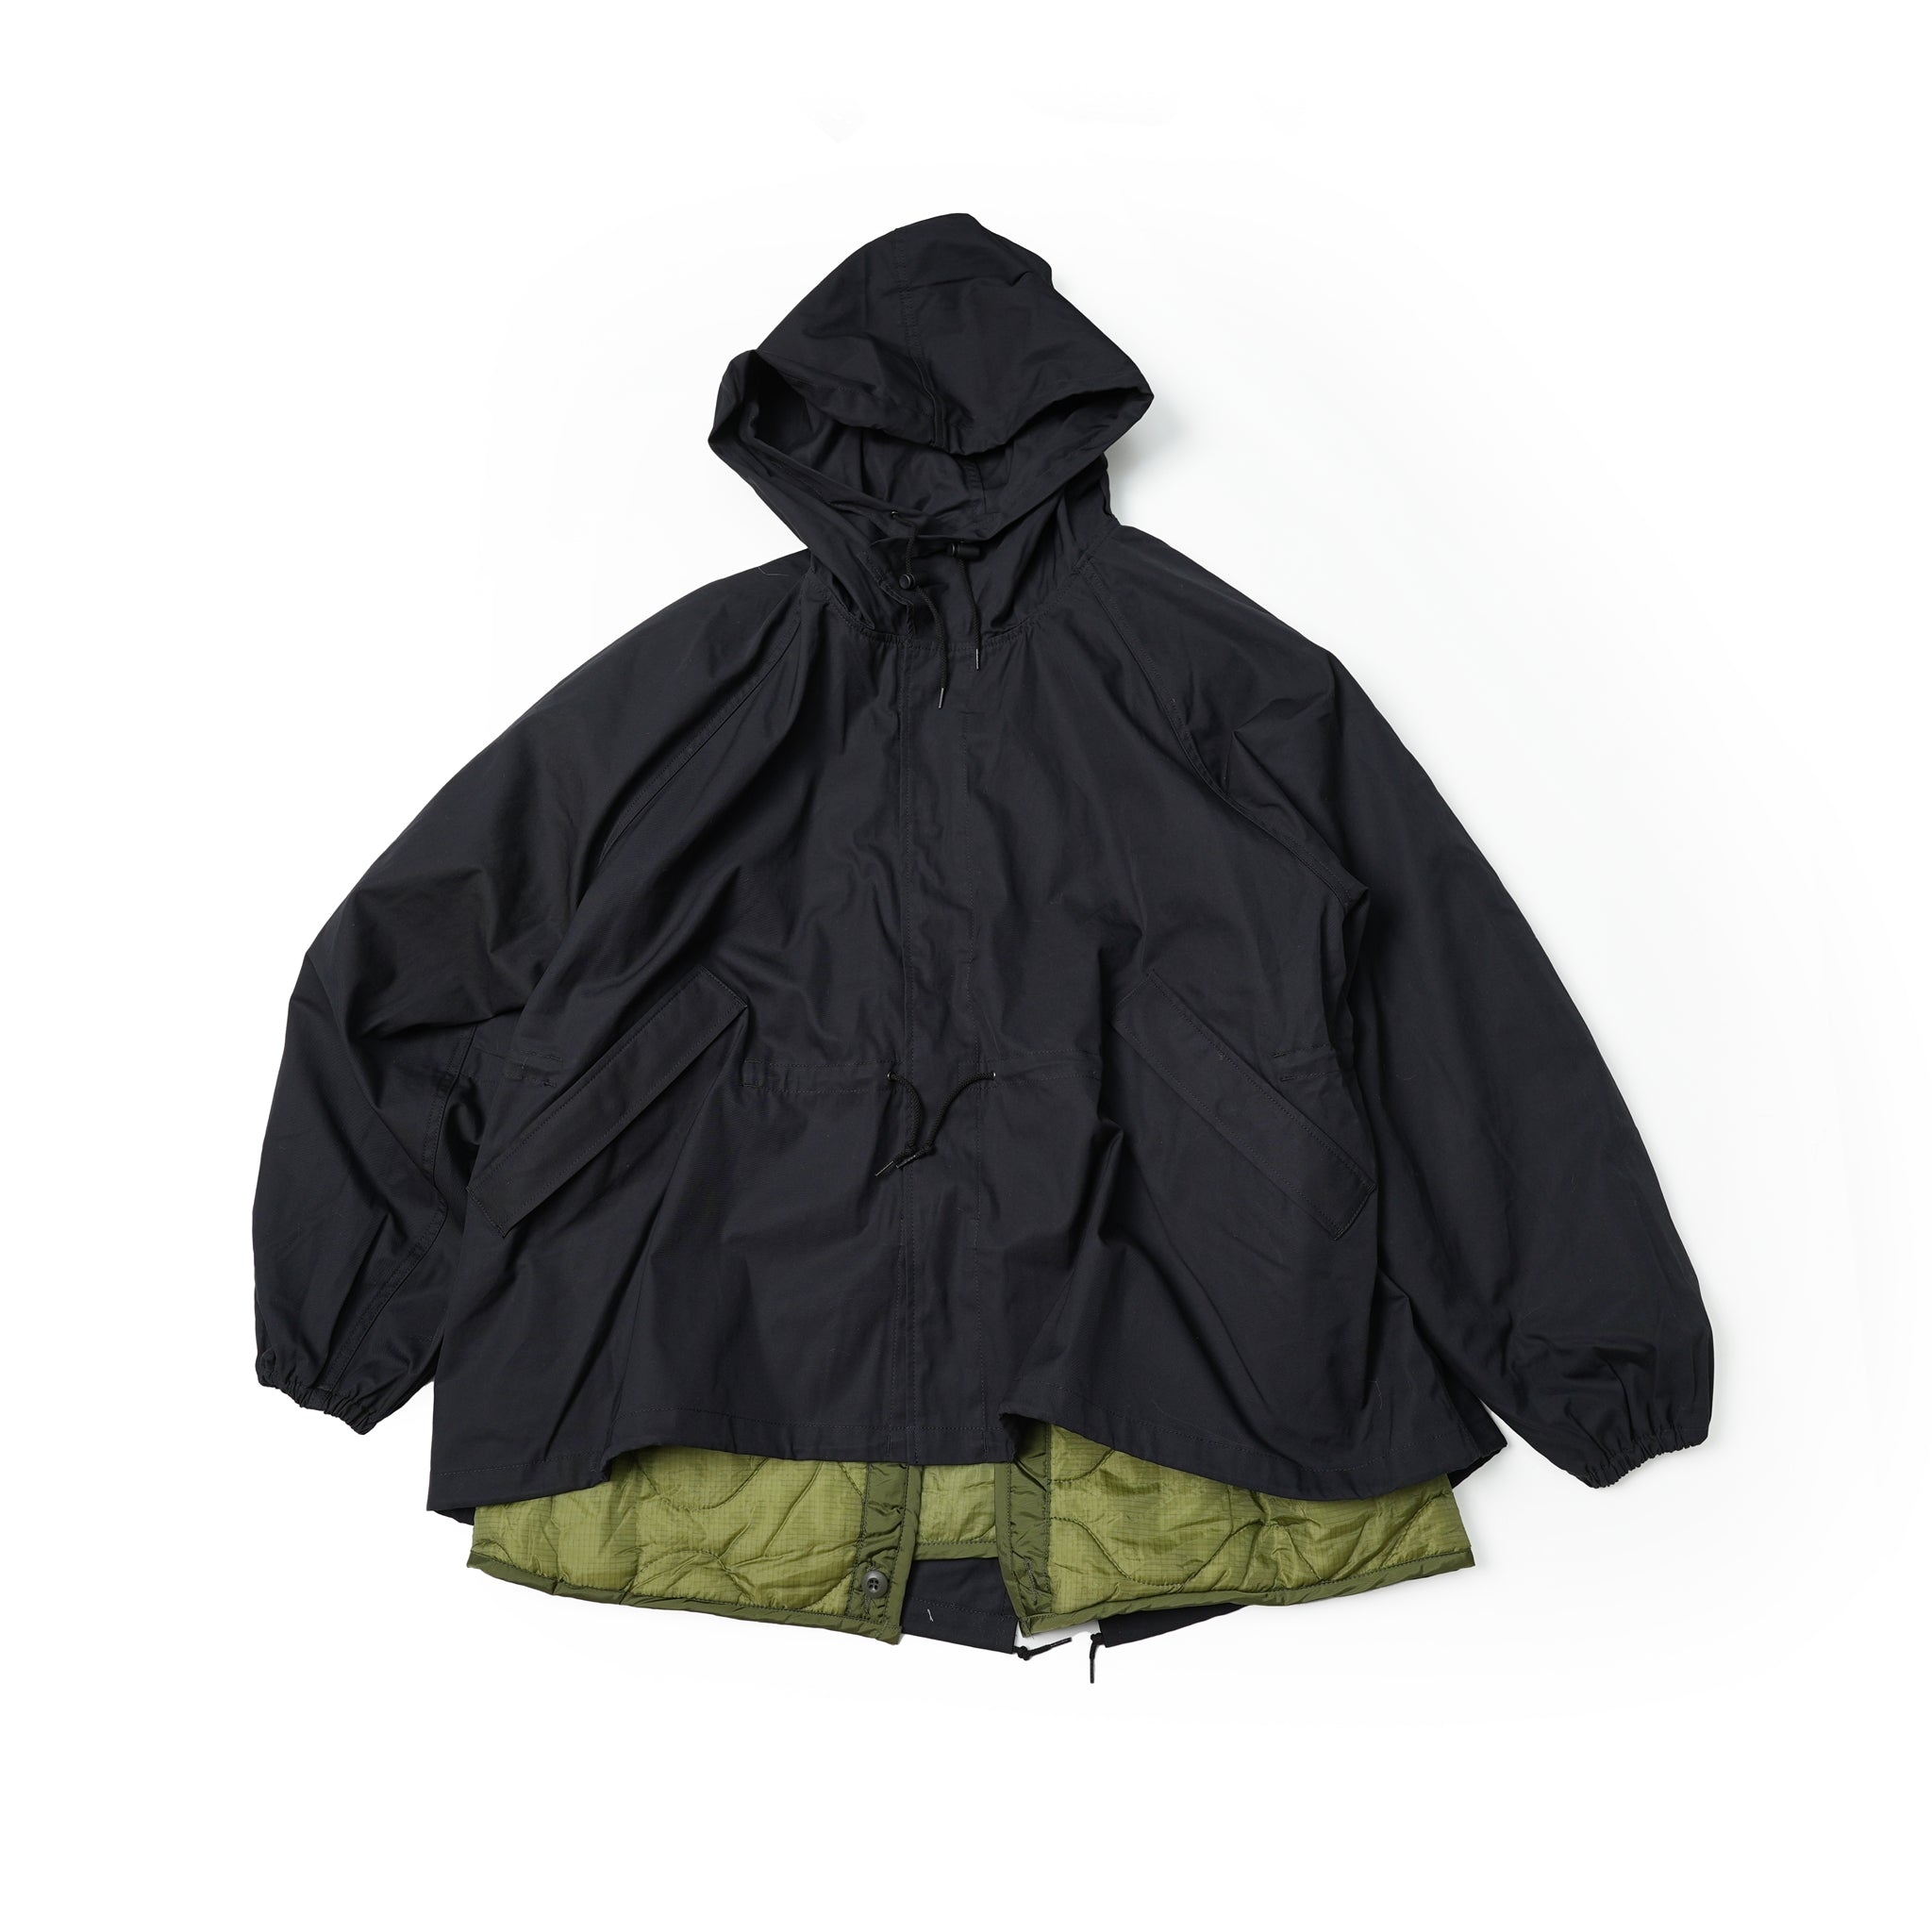 No:ms21f007 | Name:Ashland 90s Short Snow Parka with Dead-Stock Lining